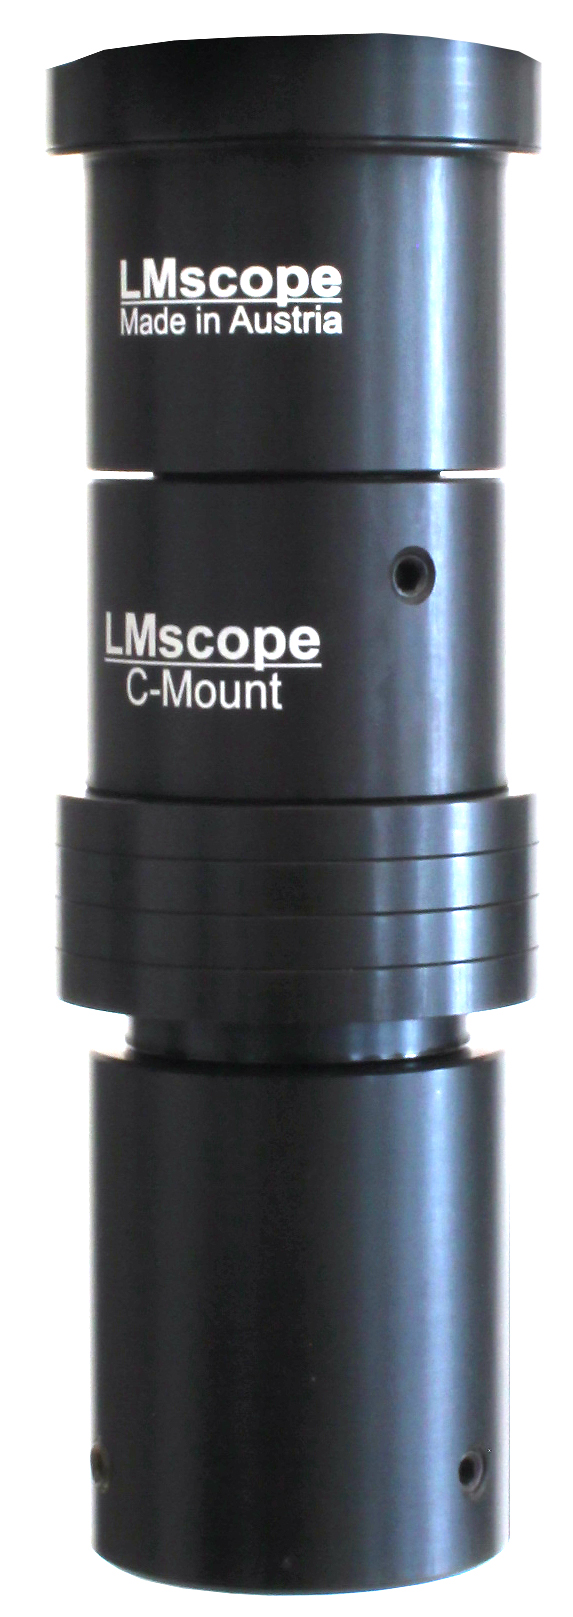 Widefield adapter solution for Bresser microscopre